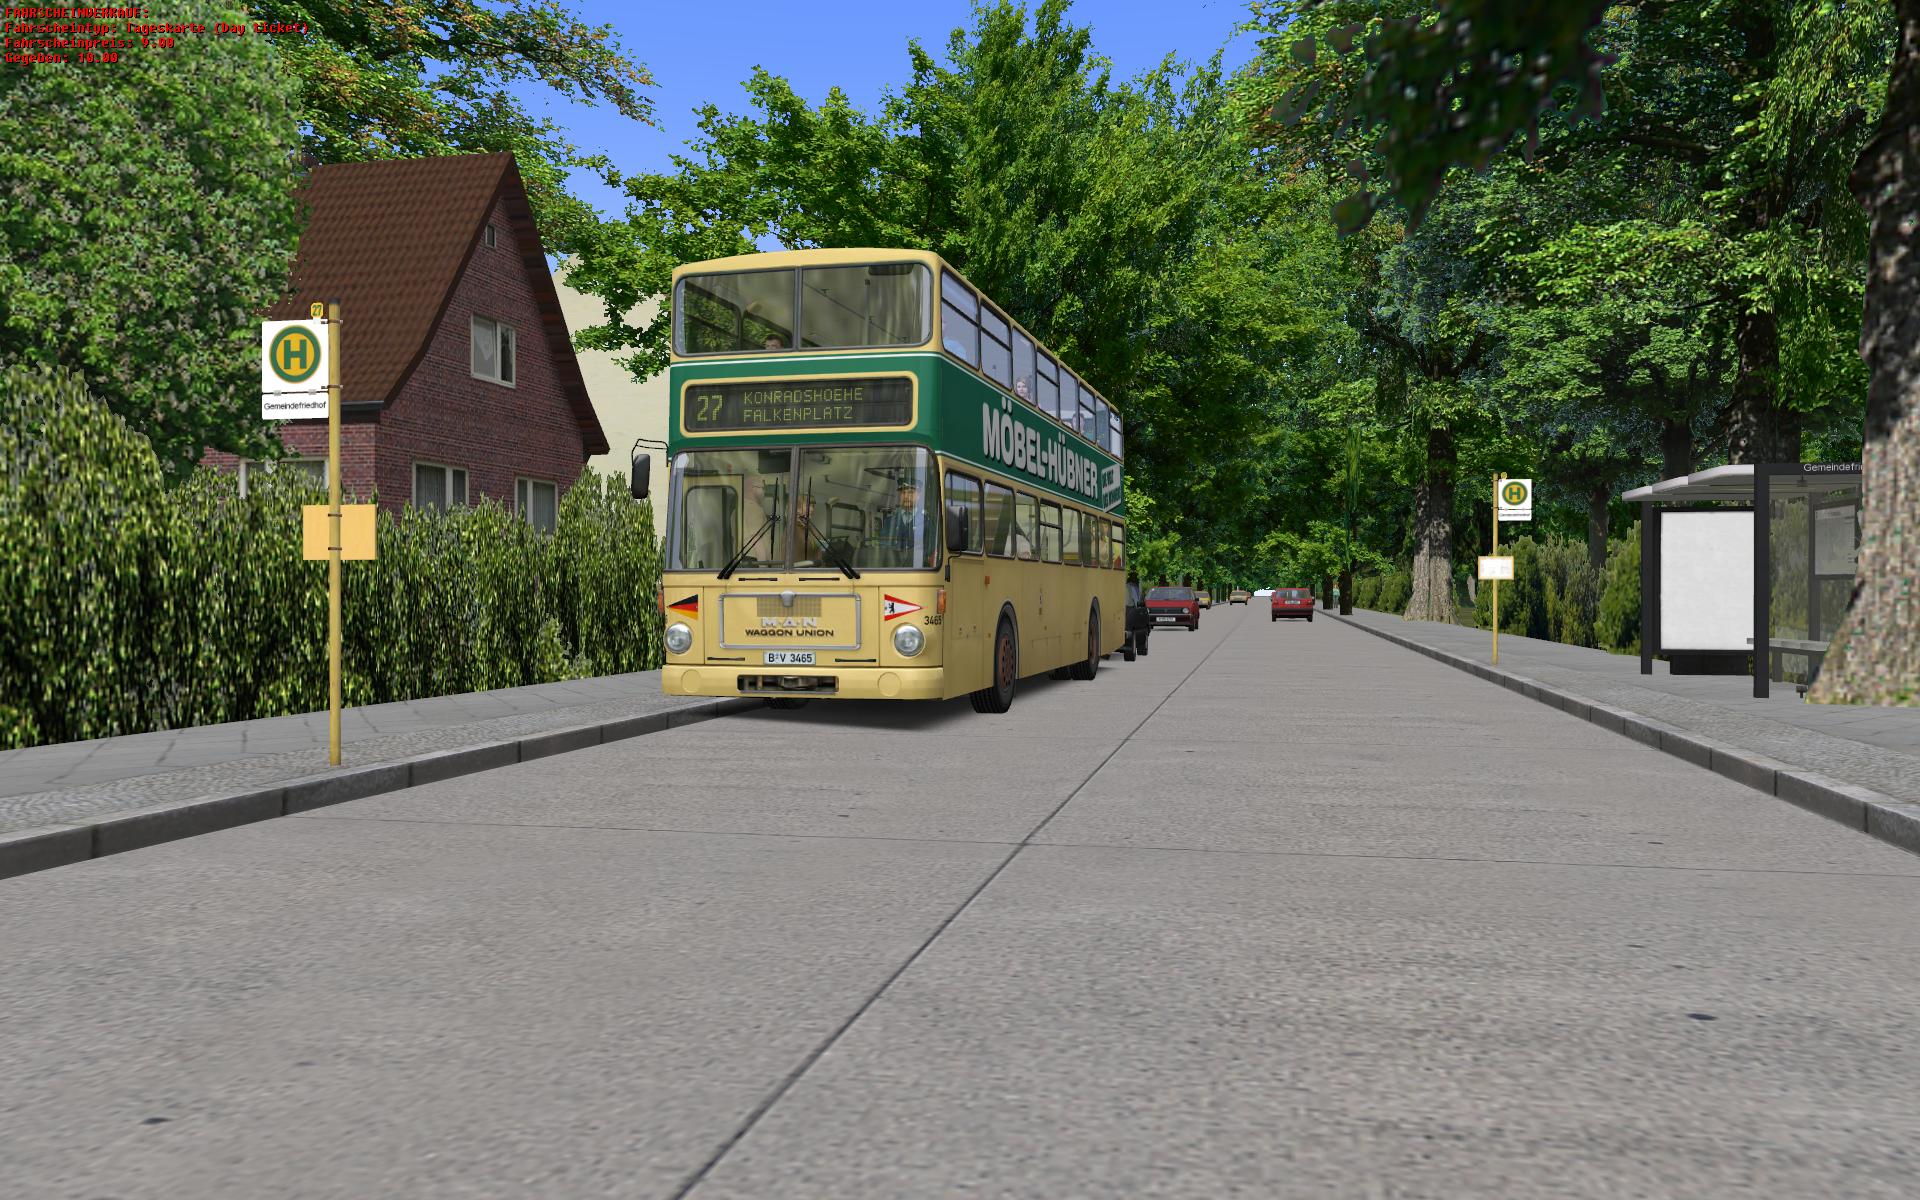 More information about "Berlin Linie 27 v1.2"